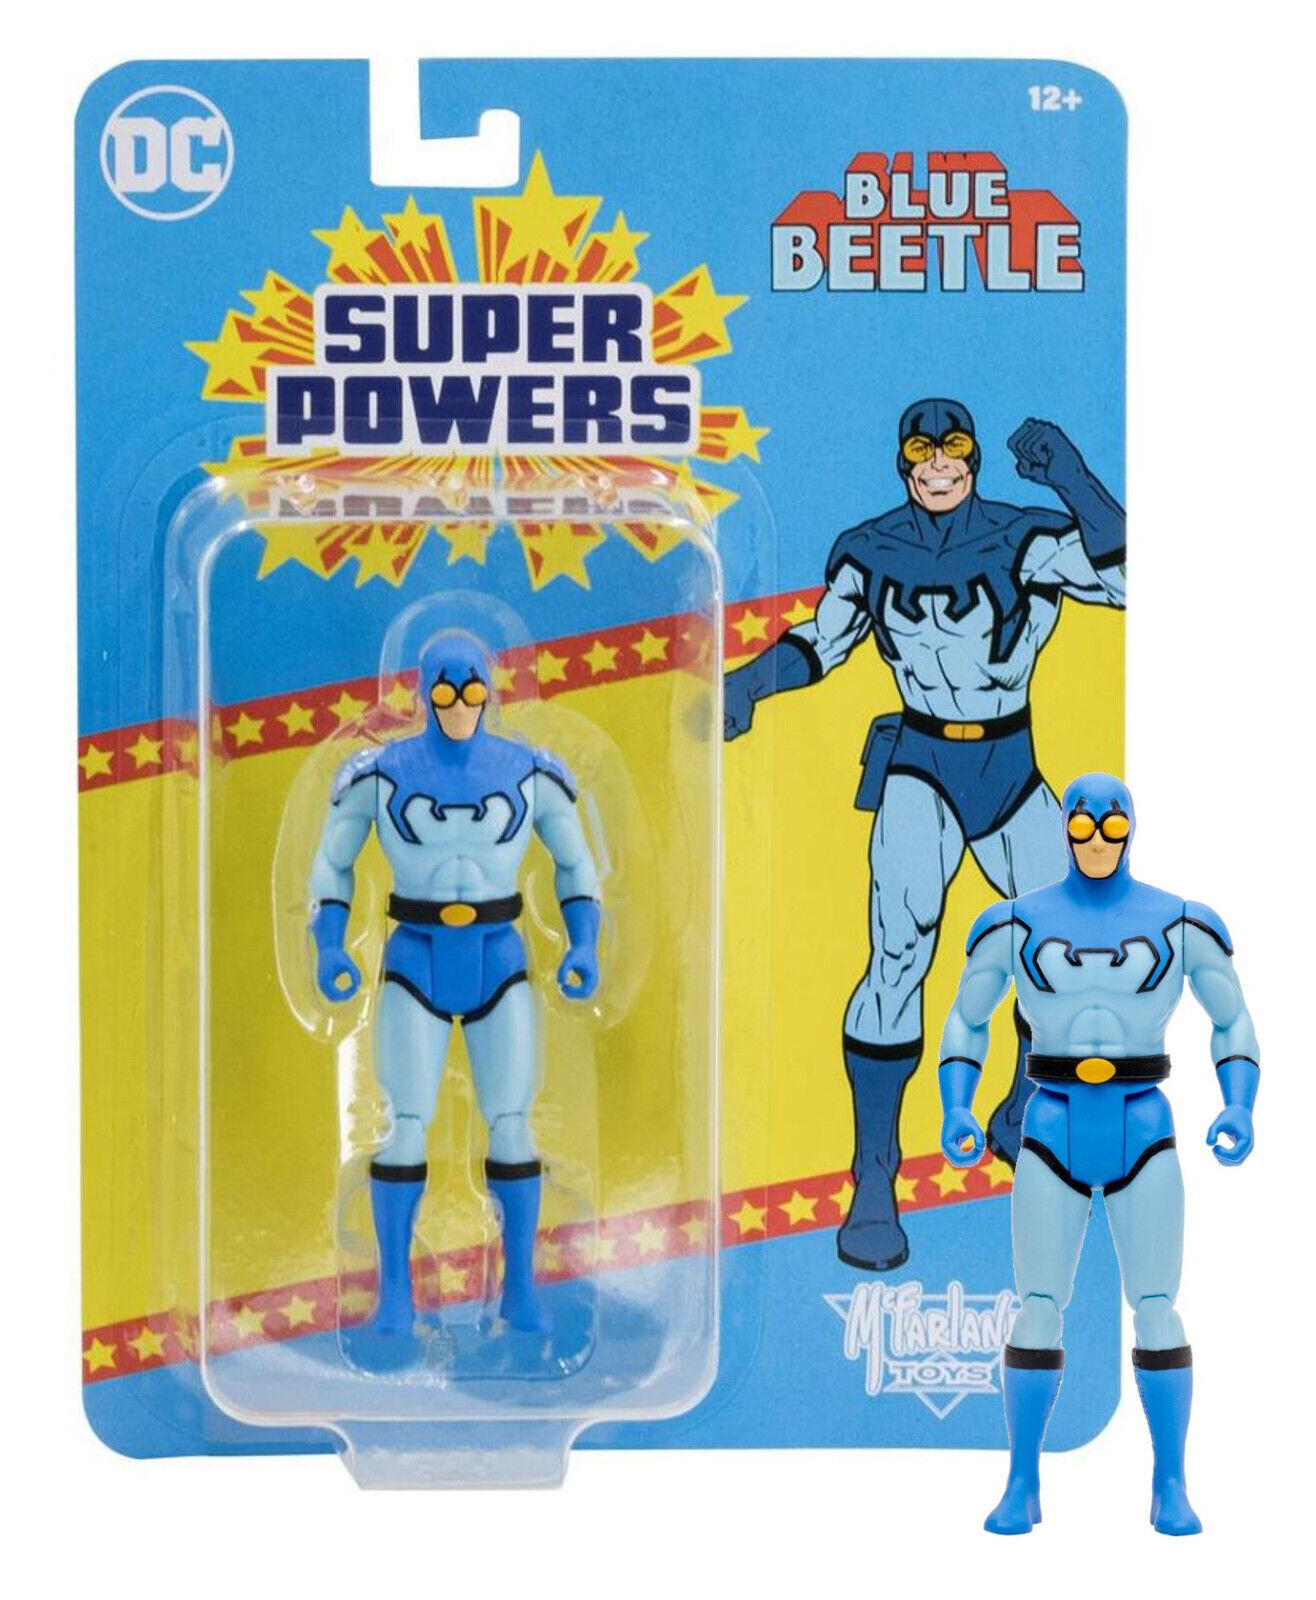 Primary image for DC Super Powers Blue Beetle Super Friends McFarlane 5in Figure Mint on Card